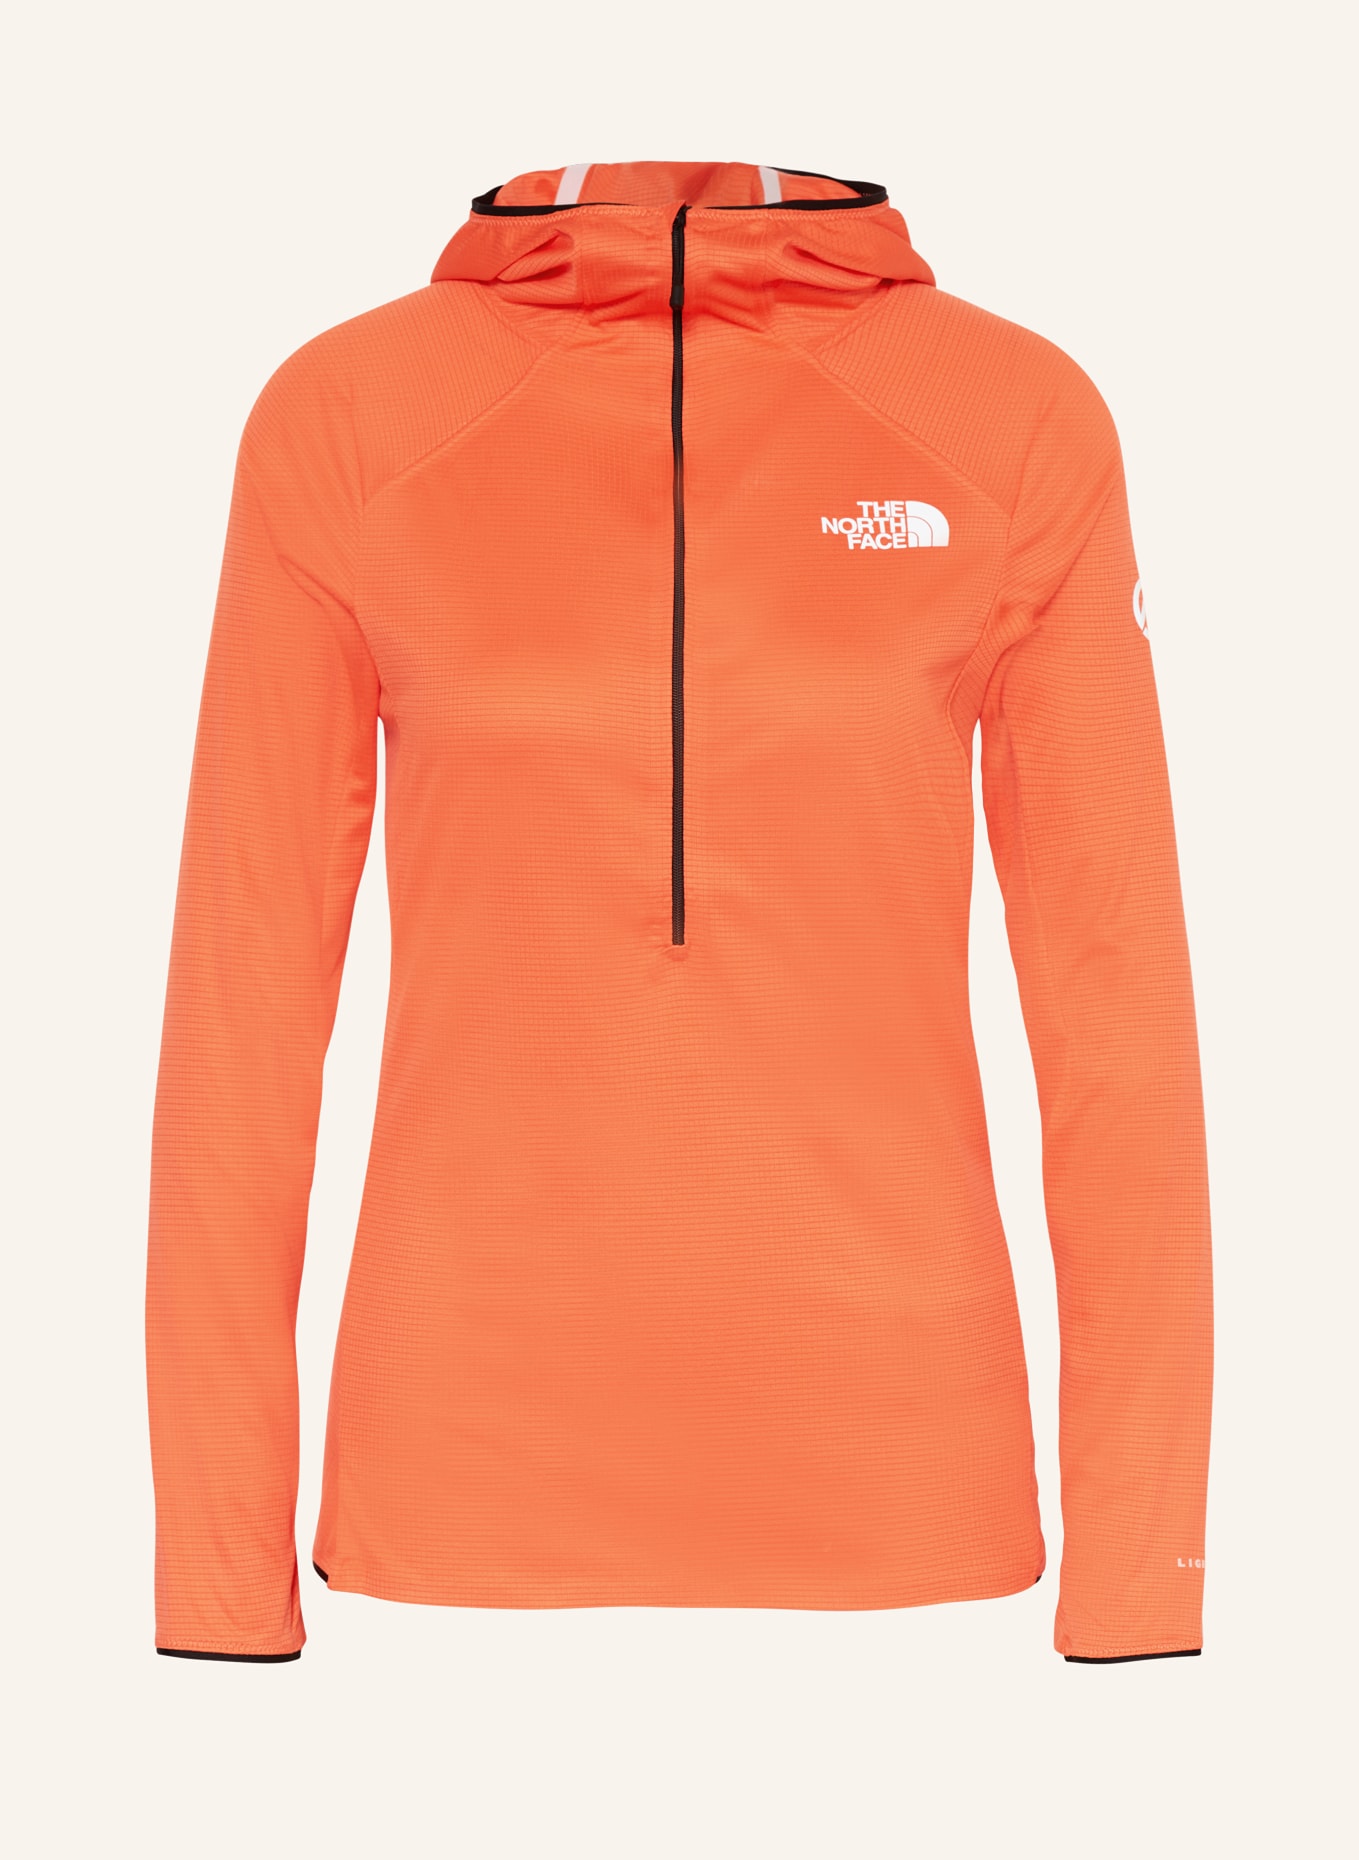 THE NORTH FACE Undershirt SUMMIT with UV protection, Color: ORANGE (Image 1)